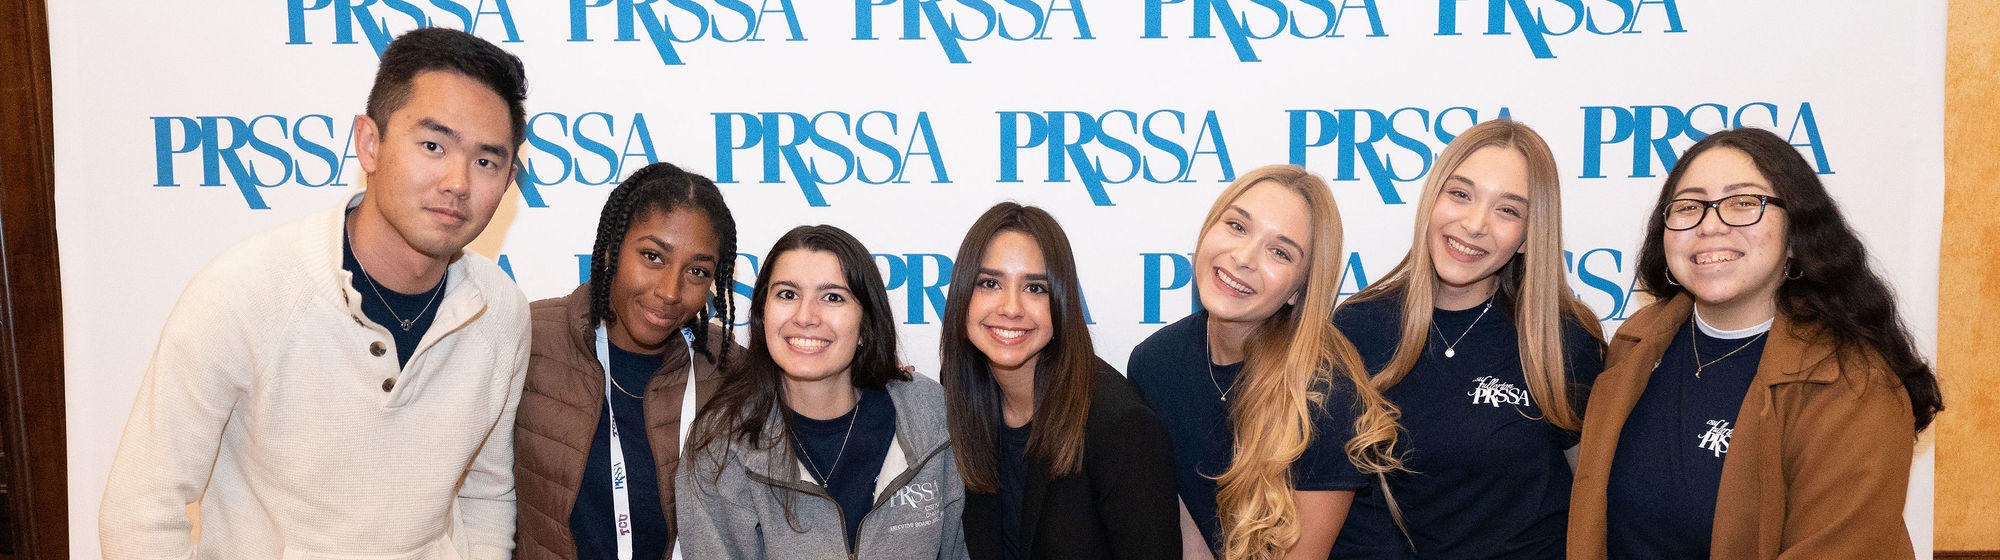 PRSSA students at an event